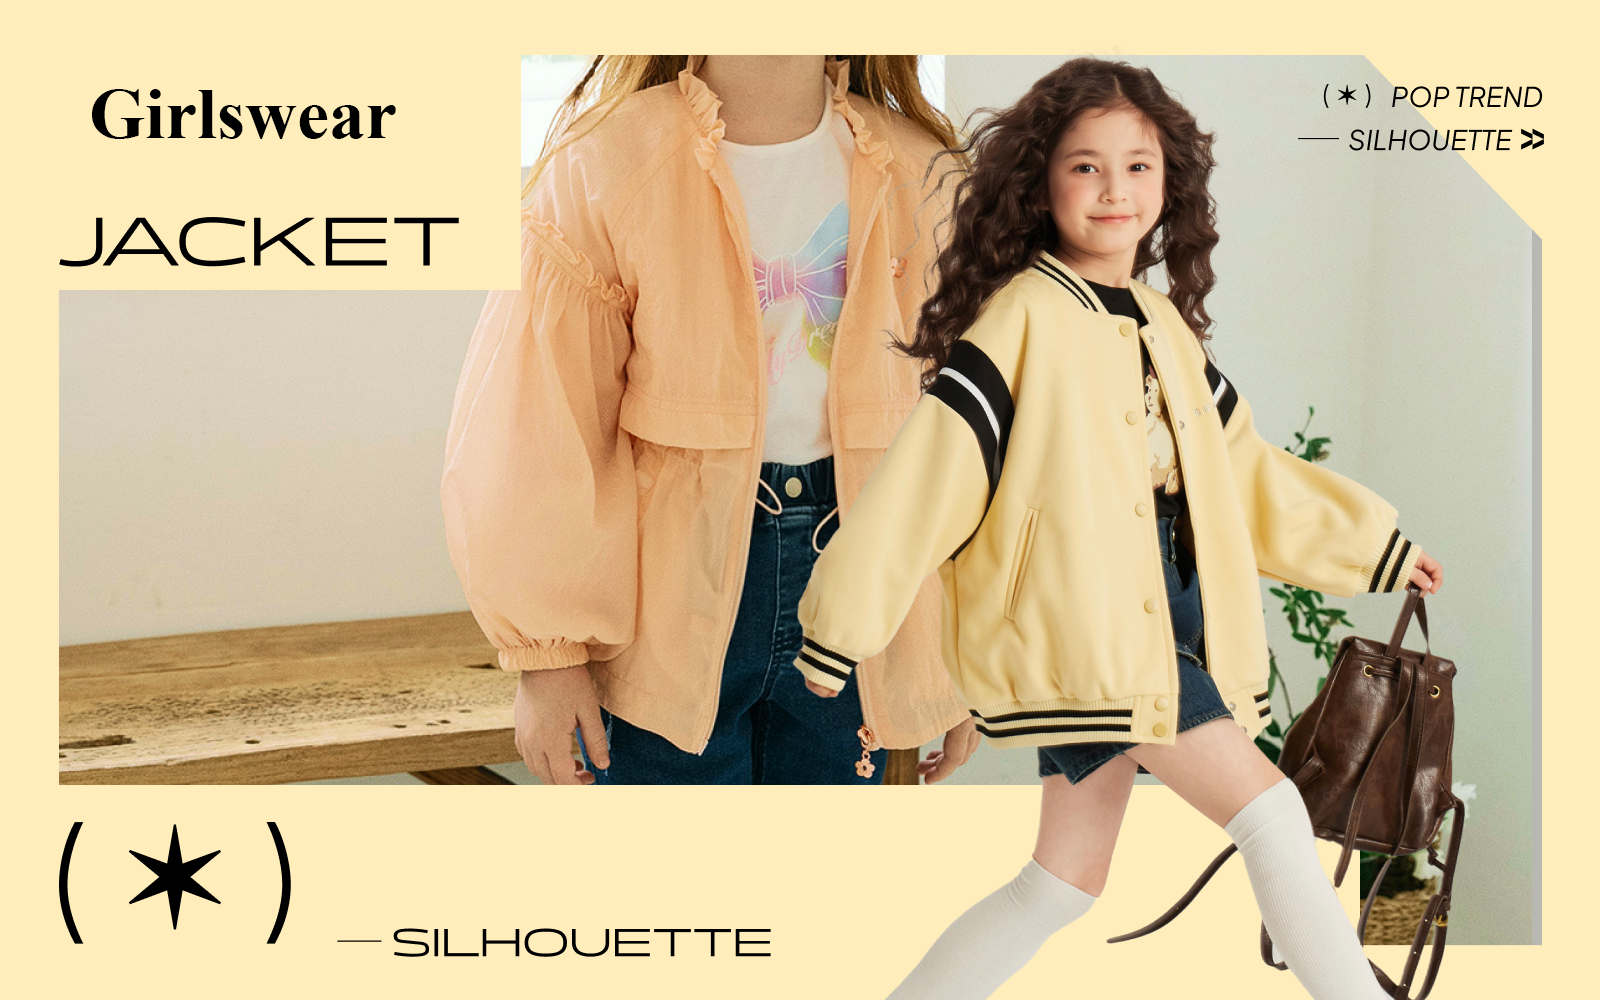 Japanese & Korean Style -- The Silhouette Trend for Girls' Outerwear